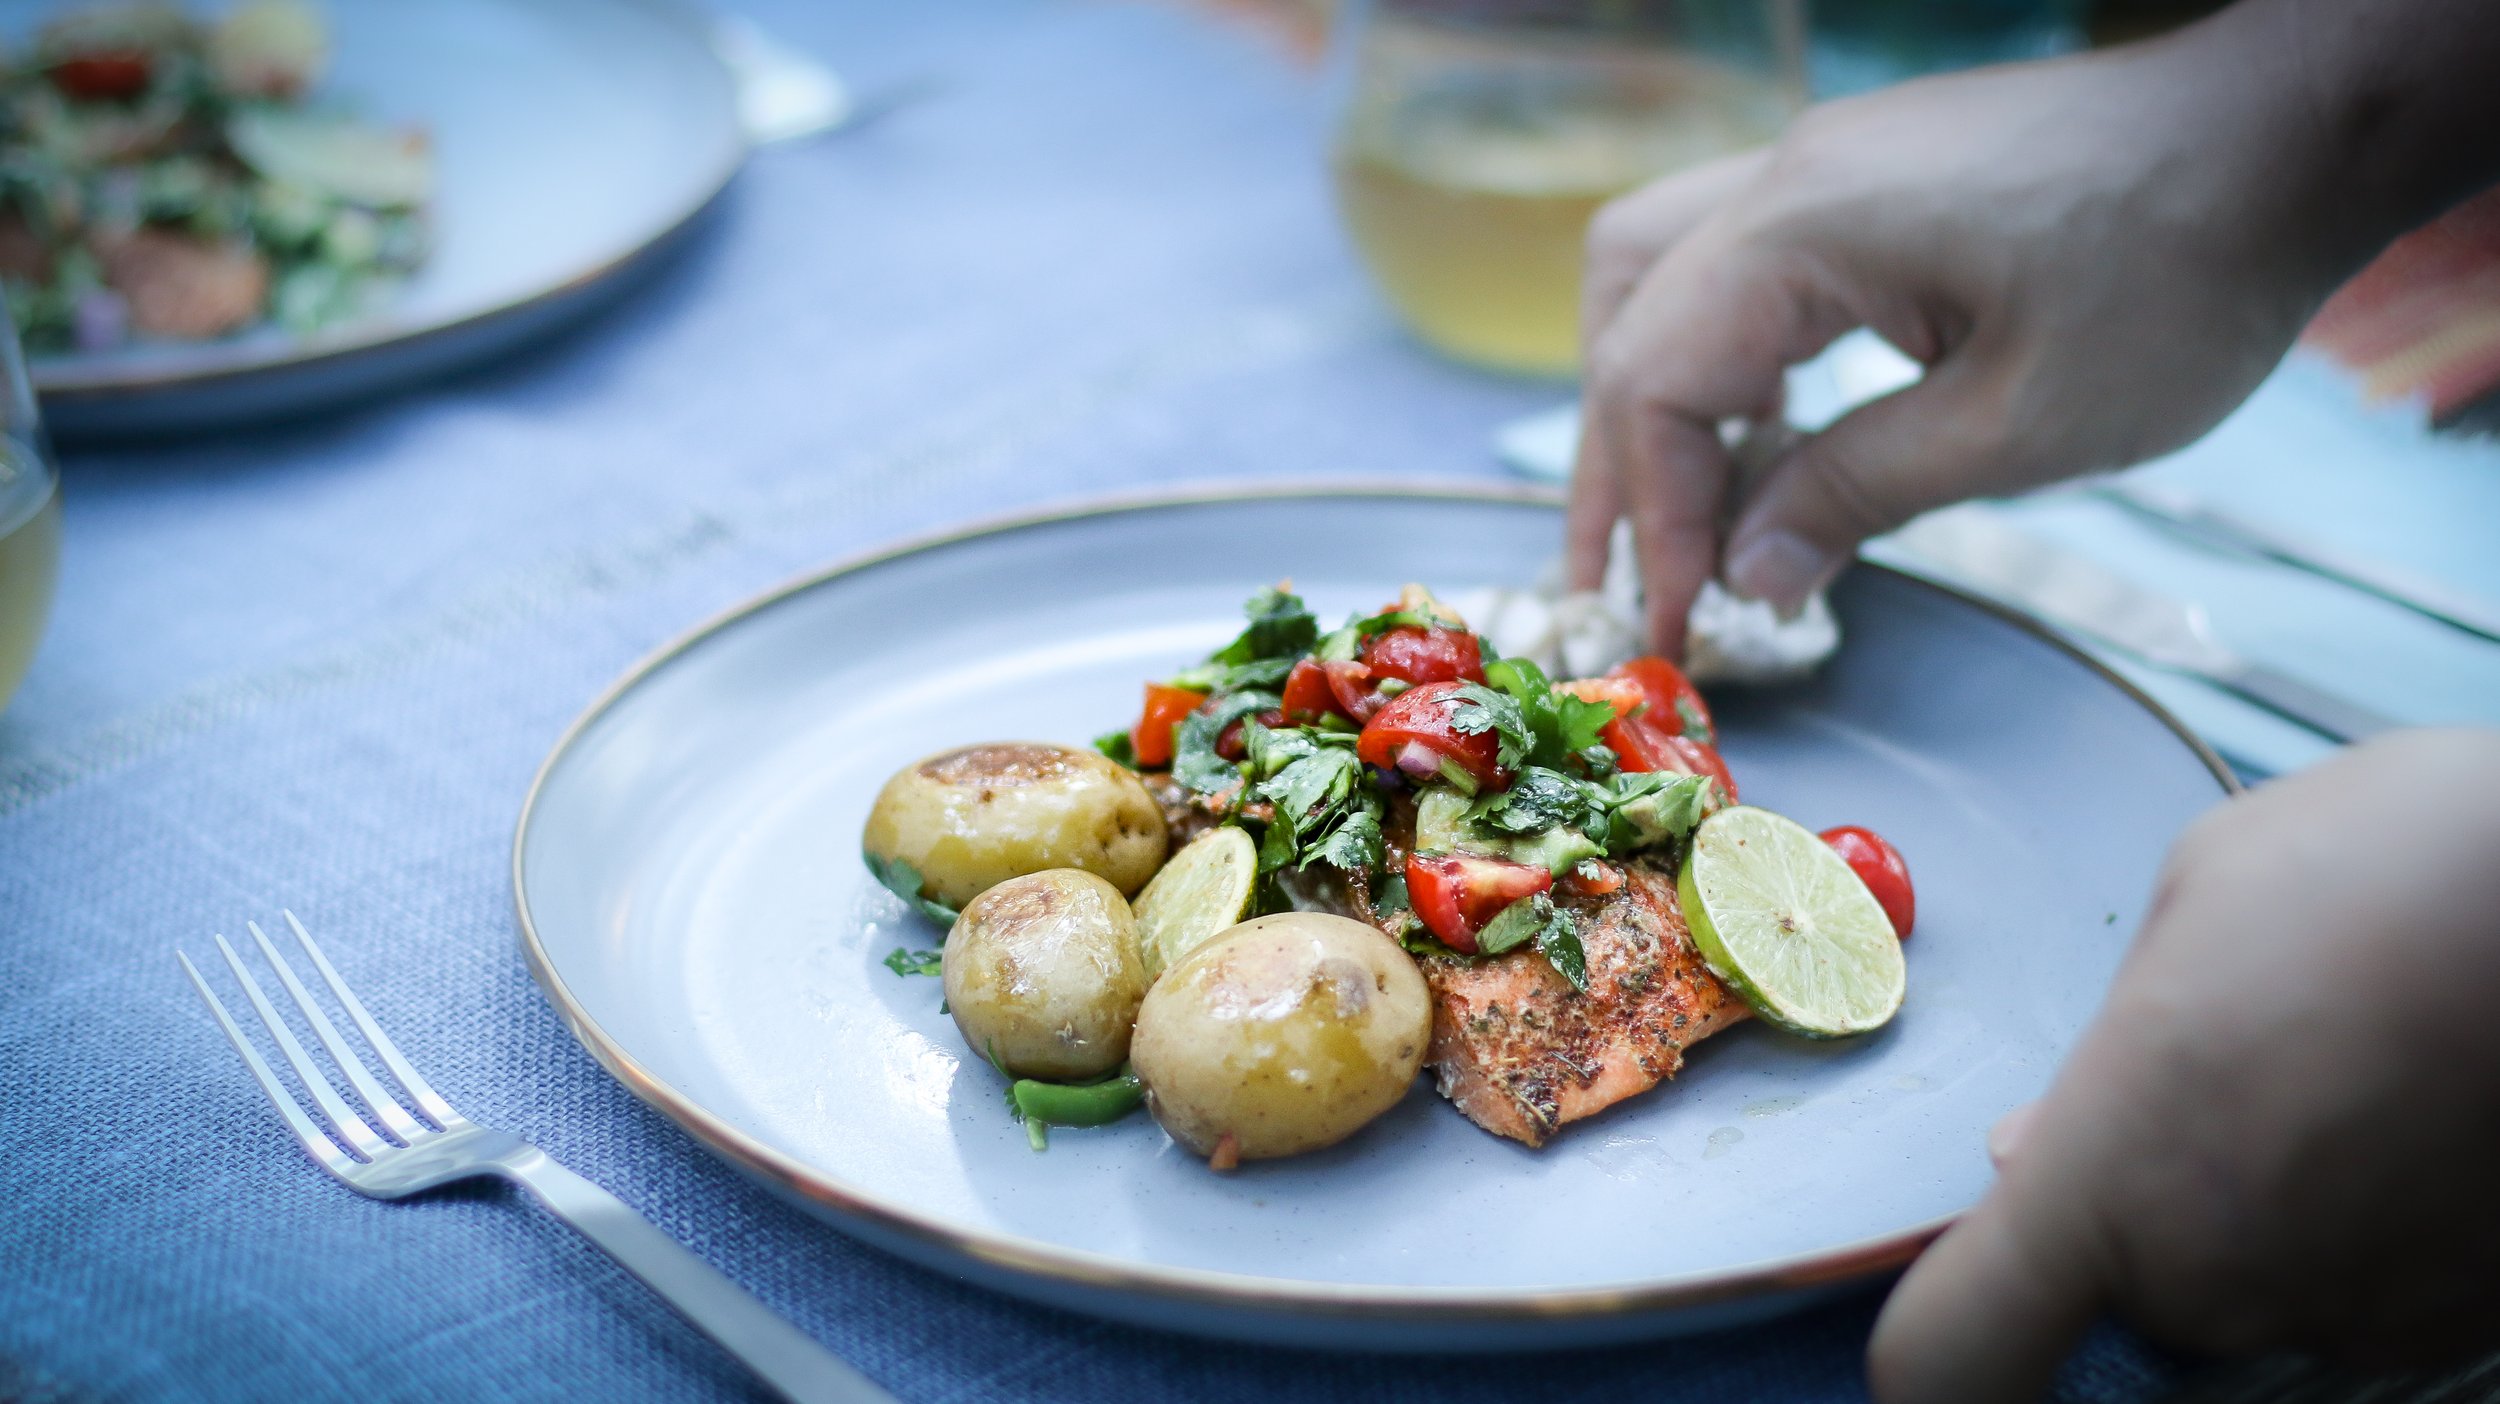 Paprika Lime Salmon with fresh Salsa - A Southern-Inspired Recipe on Plate 1.jpg